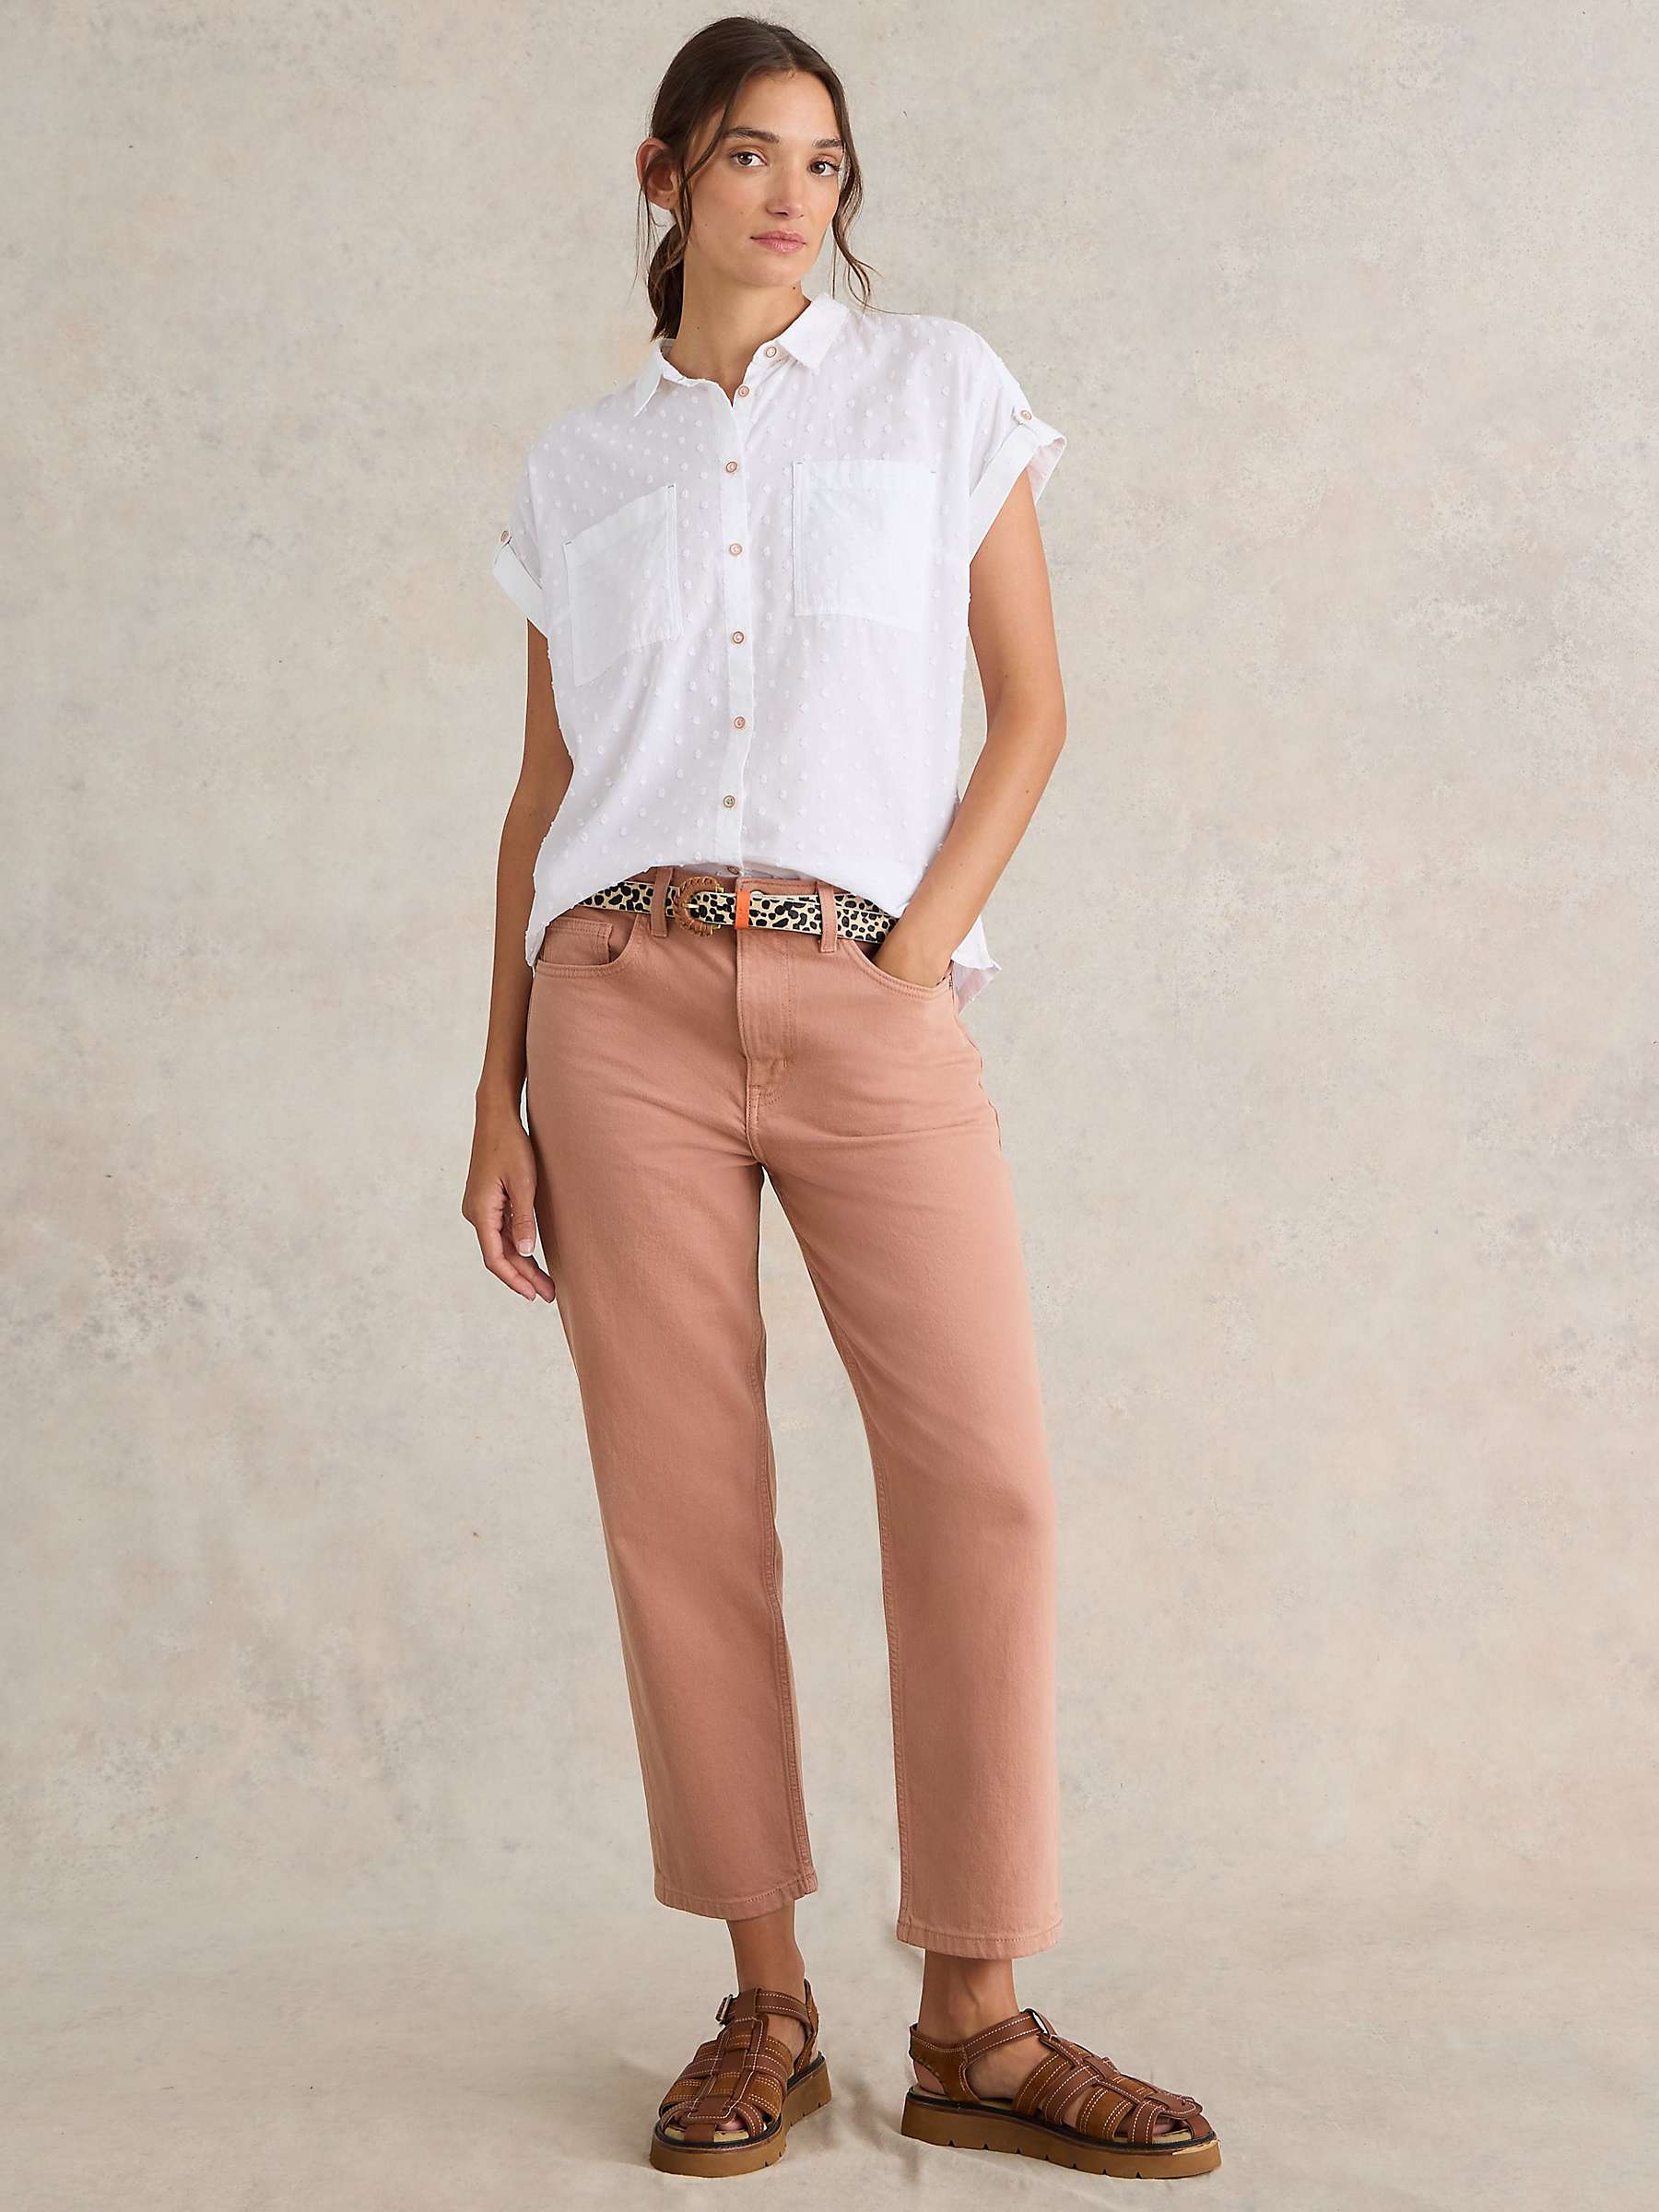 Buy White Stuff Charlie Ankle Grazer Jeans, Dusty Pink Online at johnlewis.com